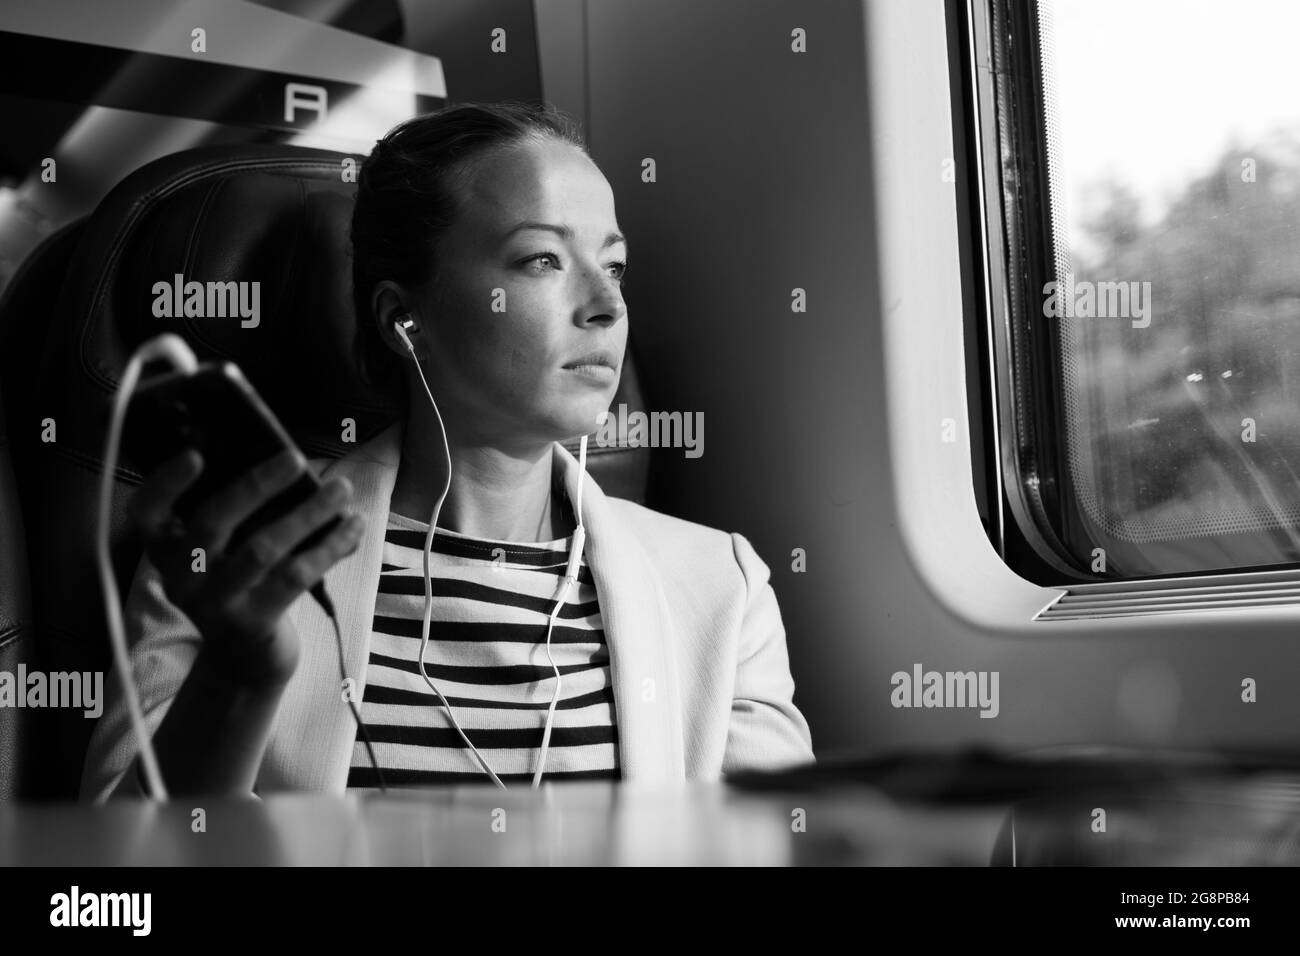 Thoughtful businesswoman listening to podcast on mobile phone while traveling by train. Stock Photo